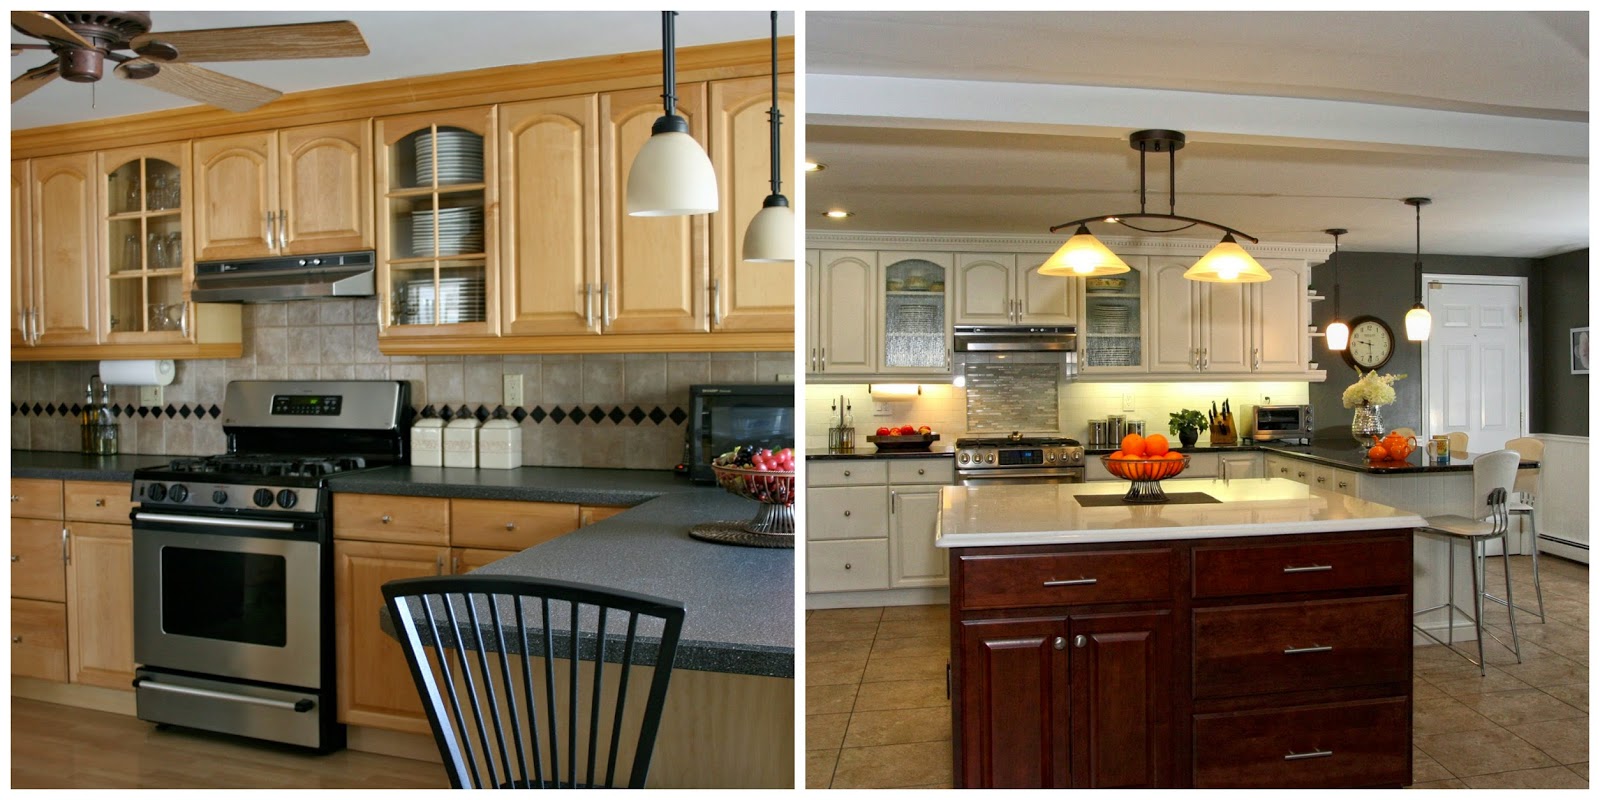 Abella Design: Revamping your Old Kitchen Cabinets